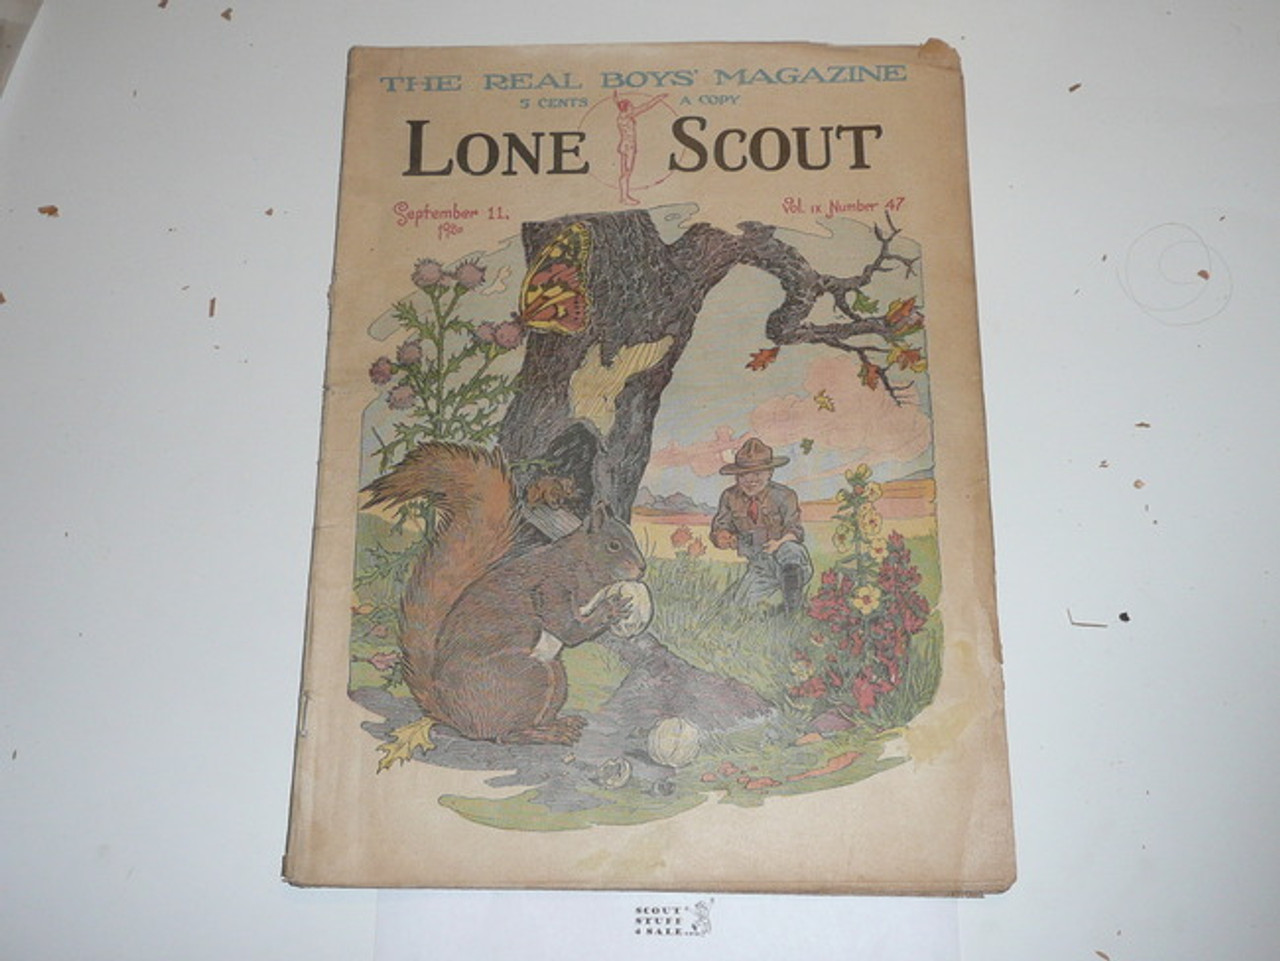 1920 Lone Scout Magazine, September 11, Vol 9 #47